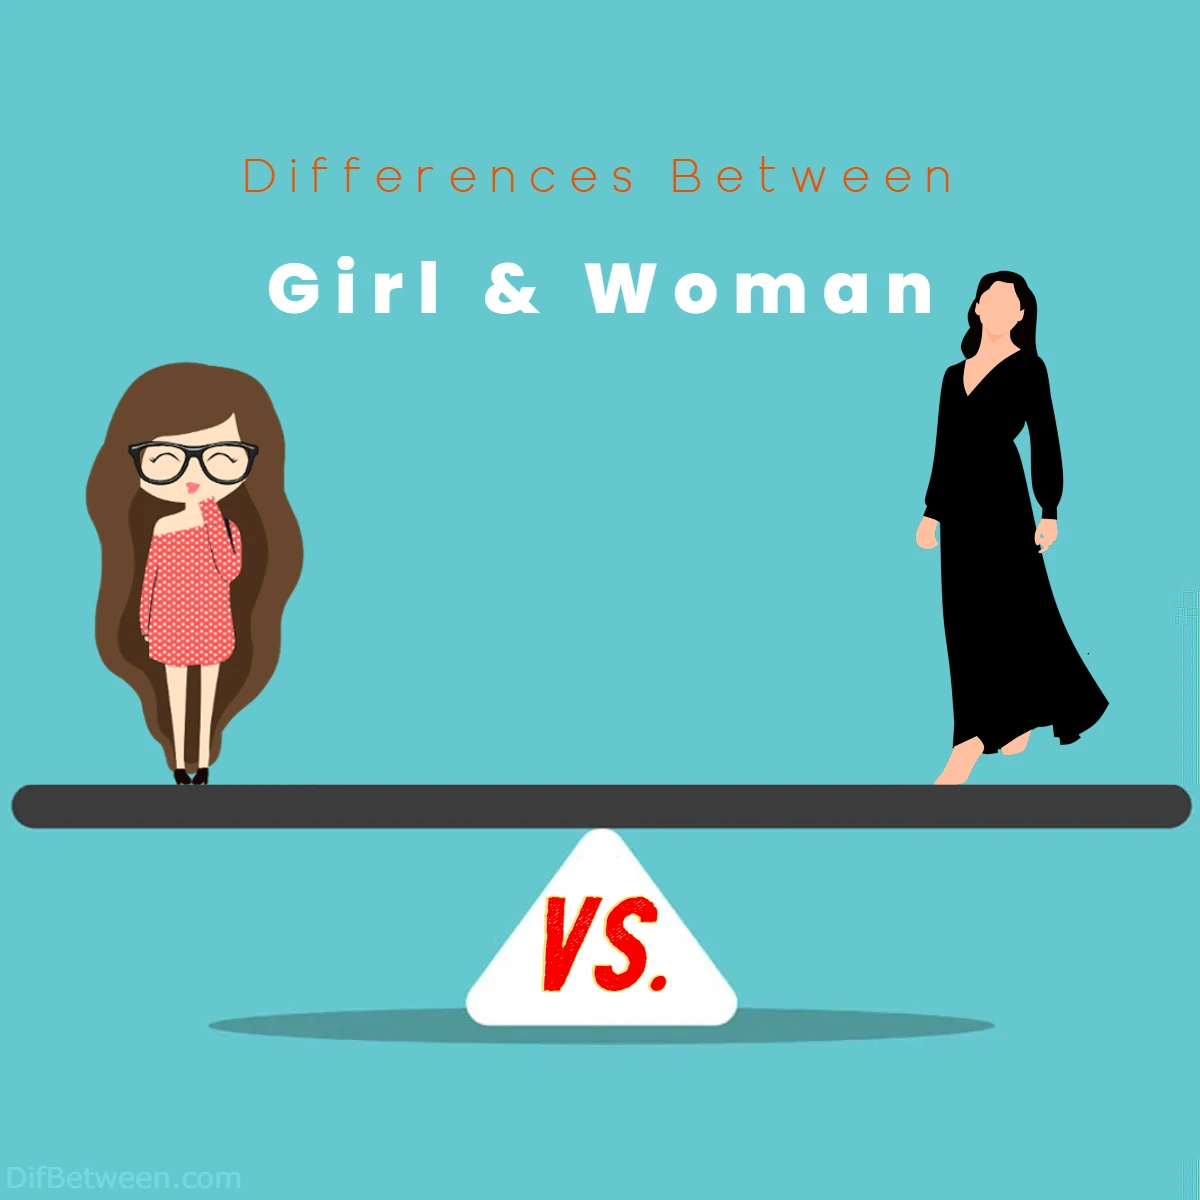 Differences Between Girl vs Woman